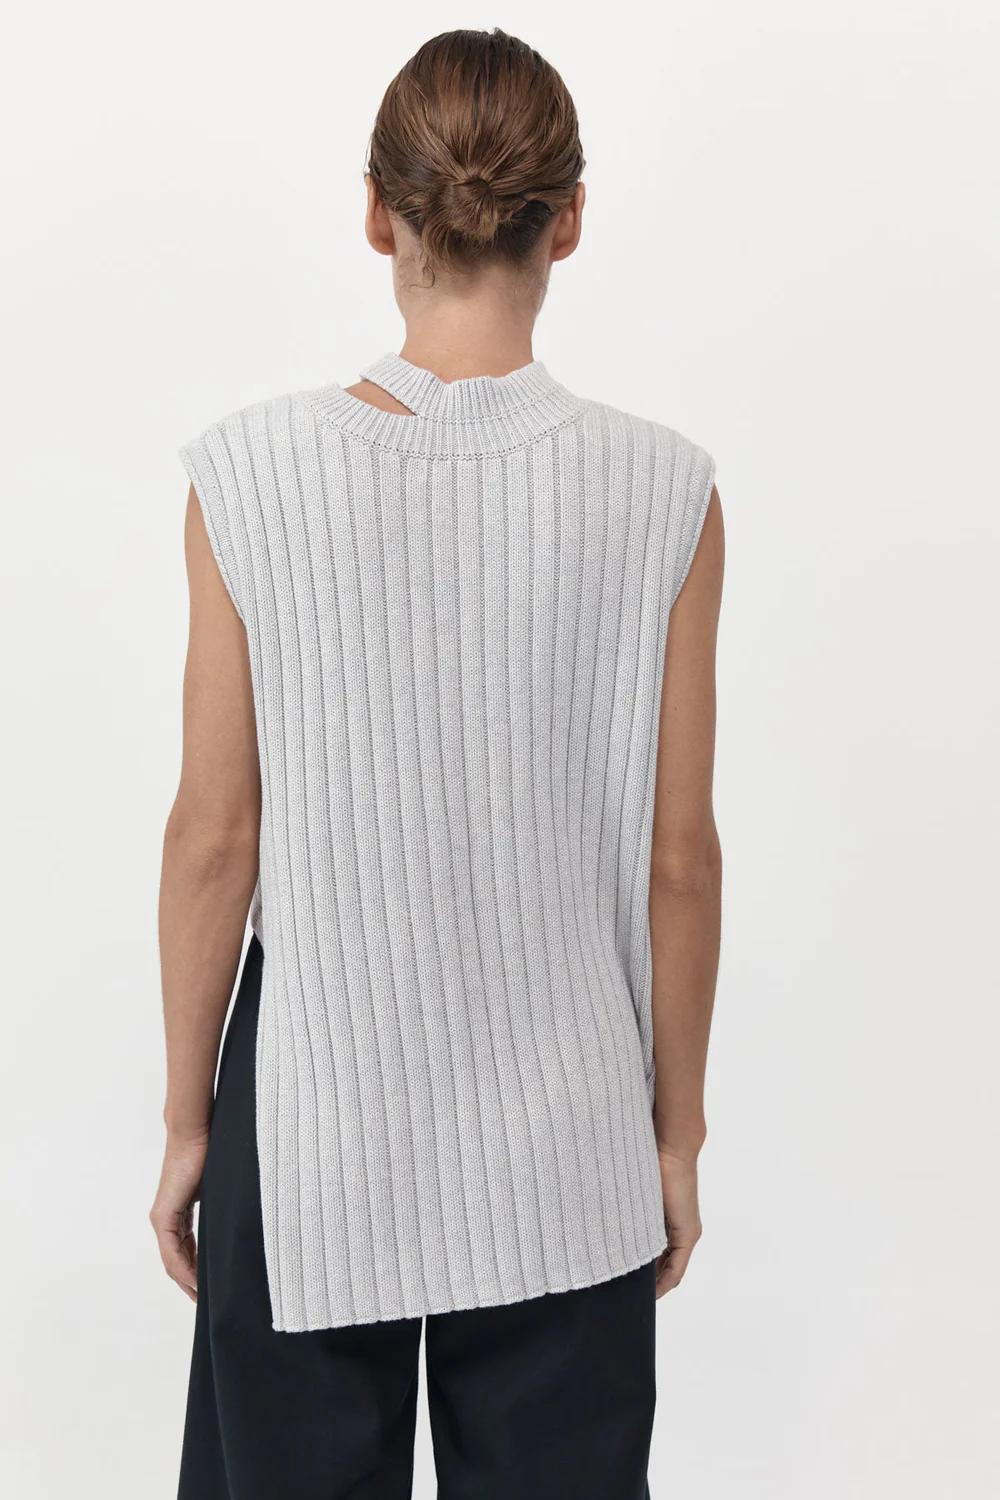 Product Image for Deconstructed Rib Knit Tunic, Soft Grey